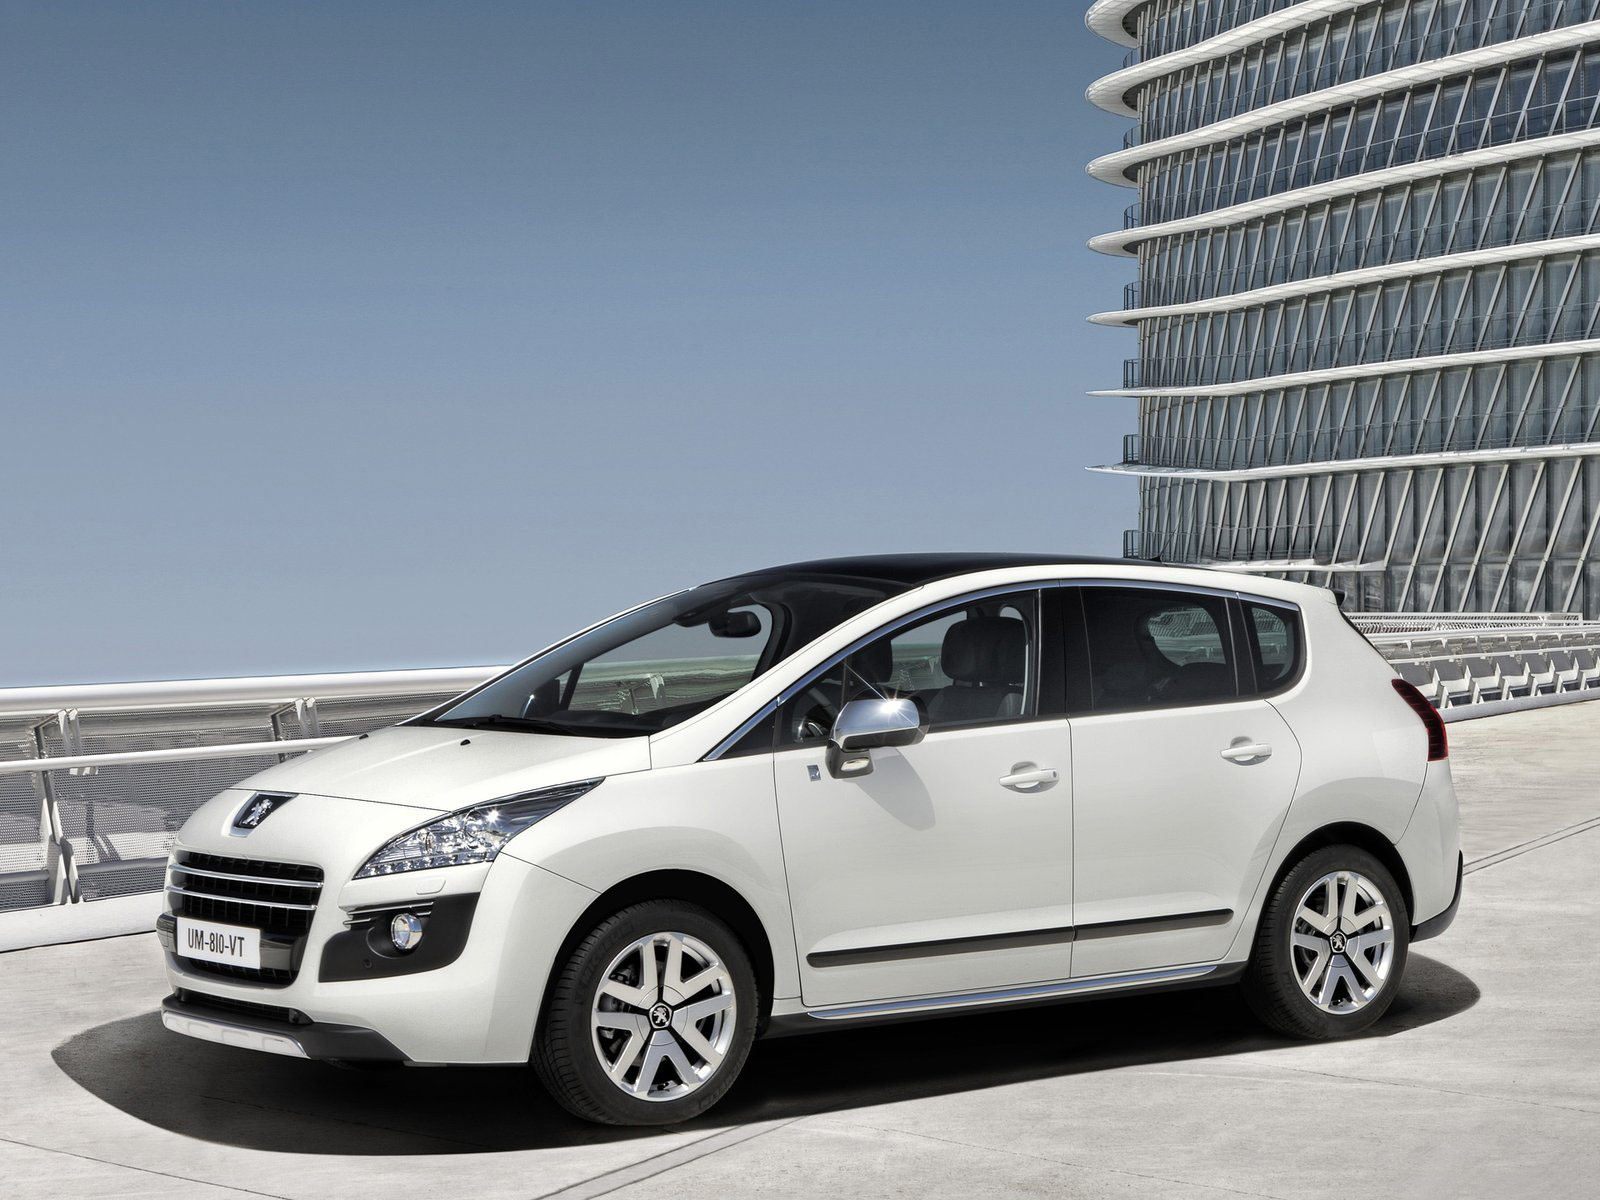 PEUGEOT 3008 HYbrid4 (2012) pictures | insurance informations